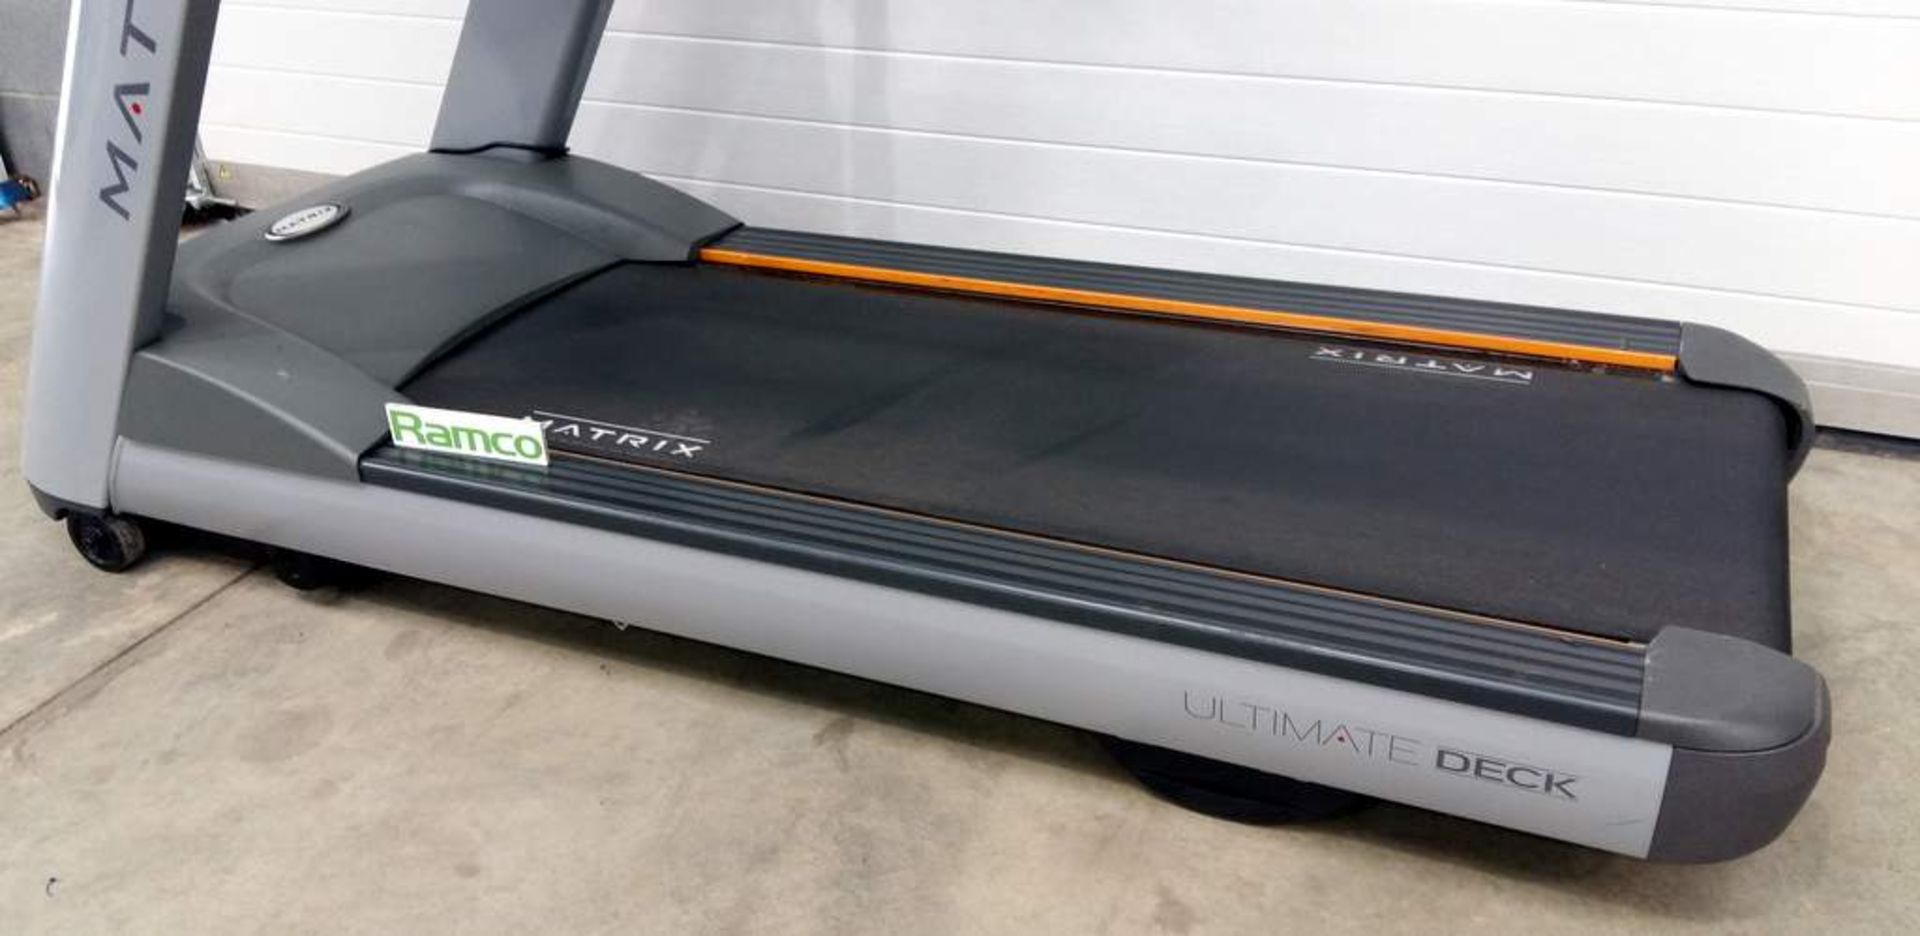 Matrix treadmill with active console Model: T7xe - Max user weight 182kg - 240v - Image 9 of 18